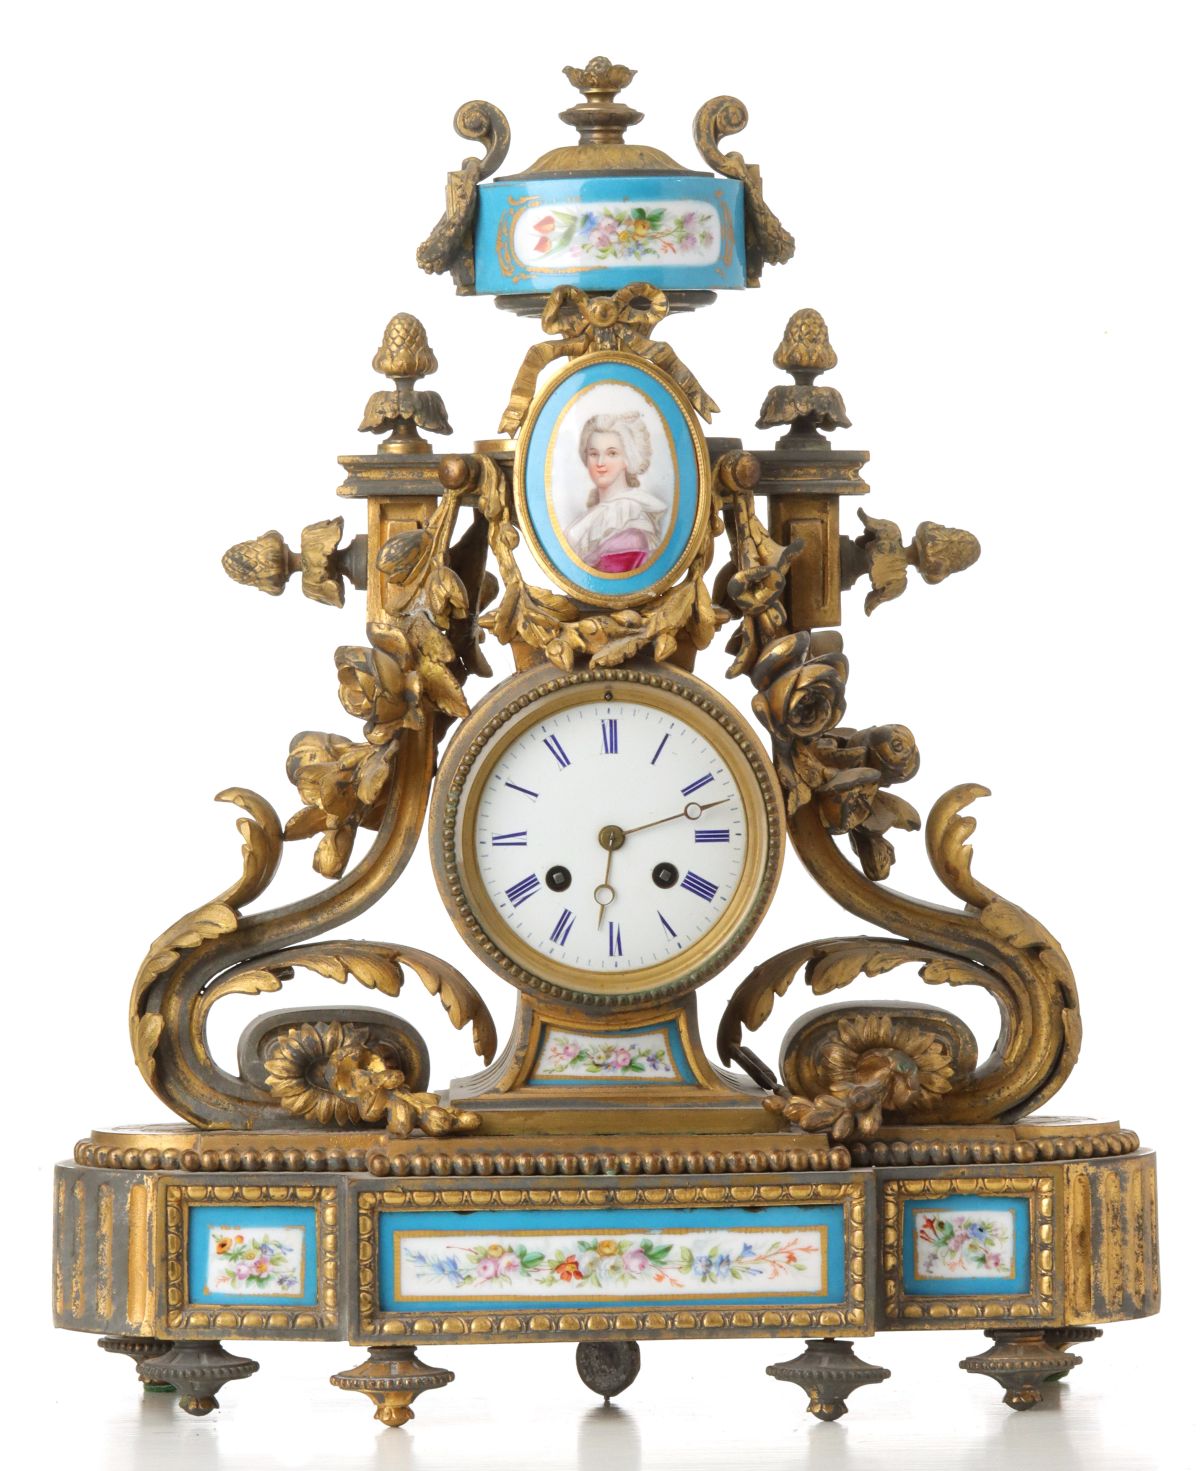 A 19TH C. FRENCH GILT BRONZE CLOCK WITH PORCELAIN